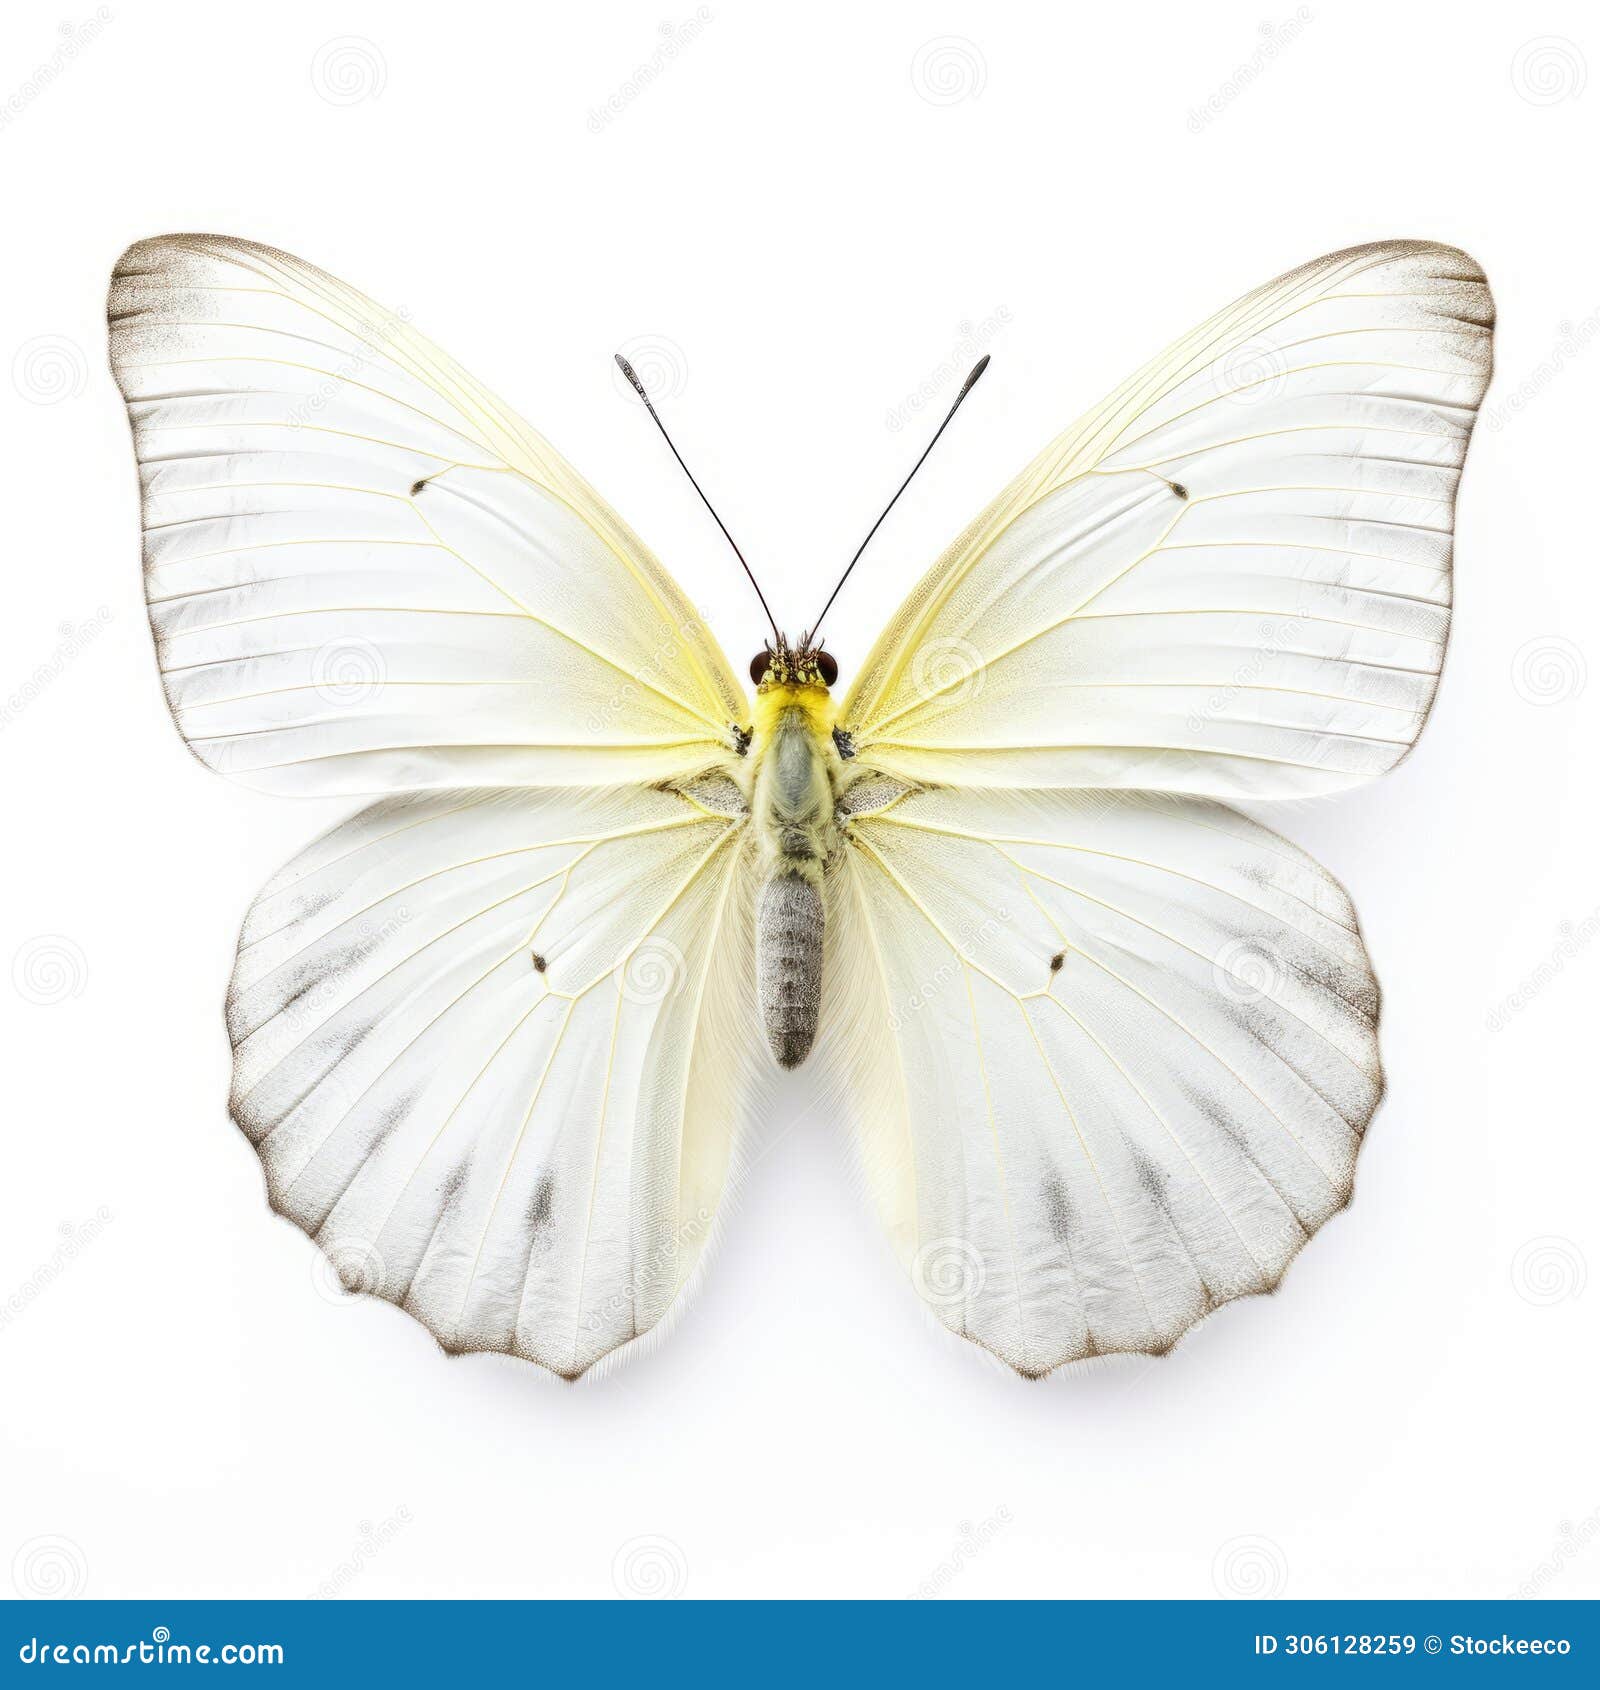 cabbage white butterfly stunning national geographic style photo